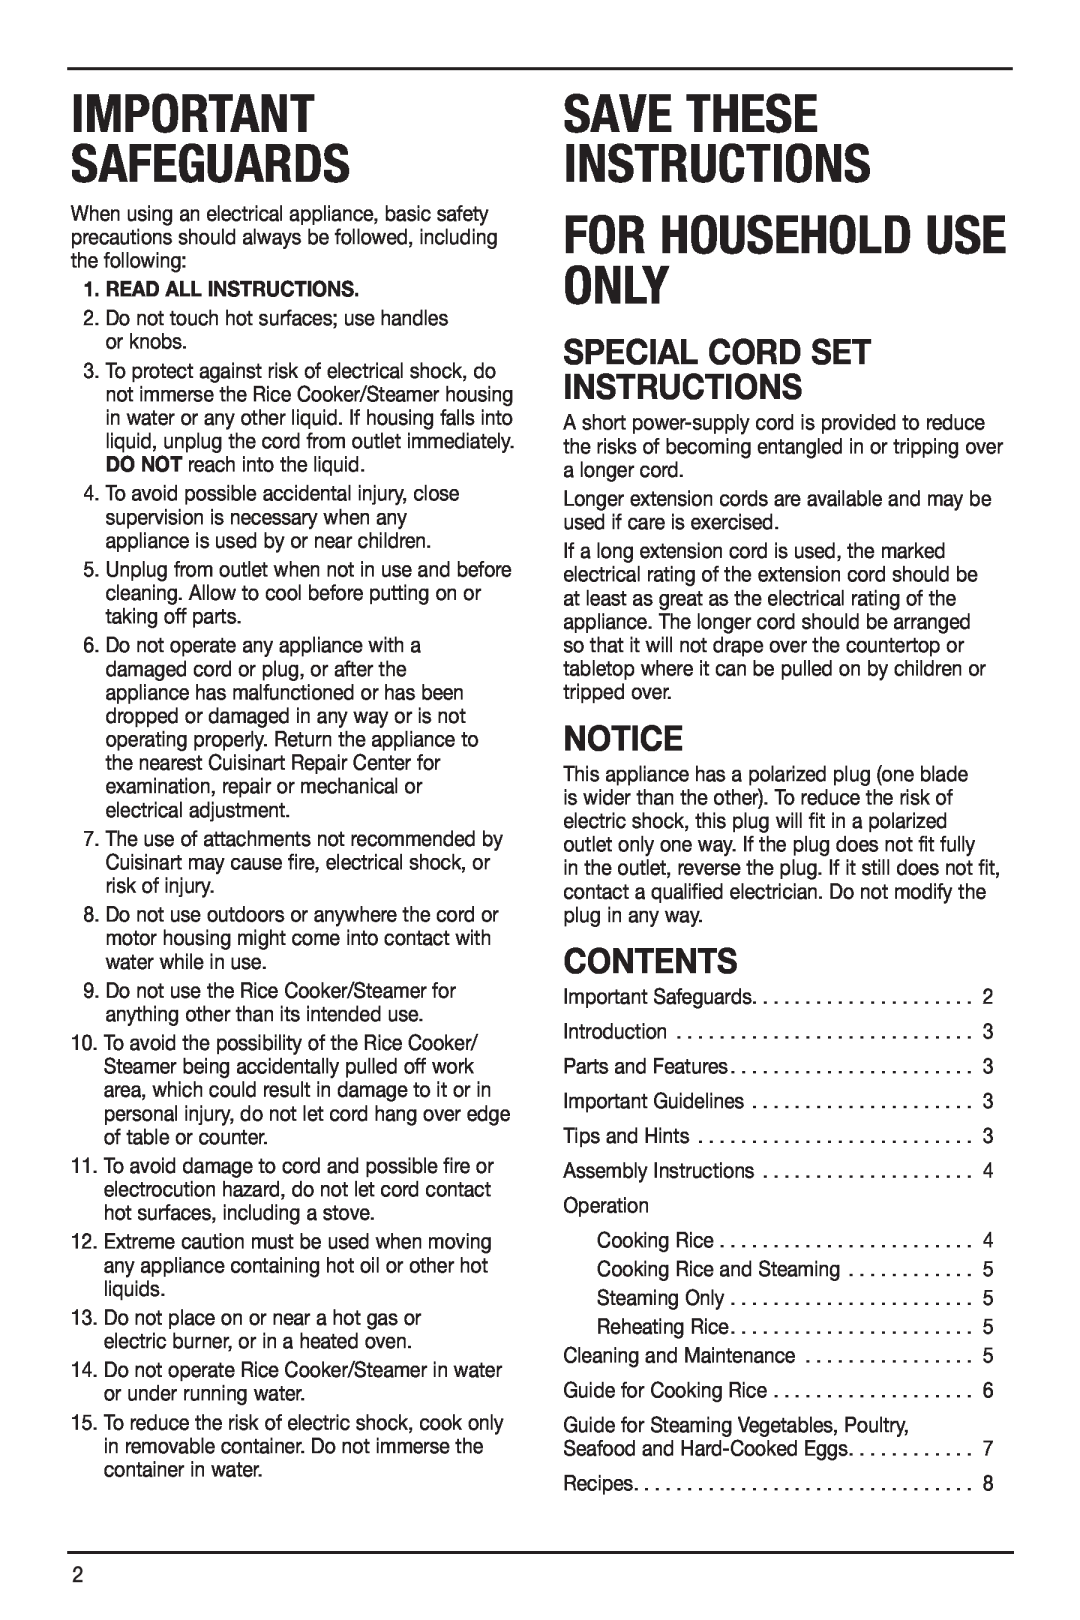 Cuisinart IB-4932B manual Special Cord Set Instructions, Notice, Contents, Safeguards, Save These Instructions 